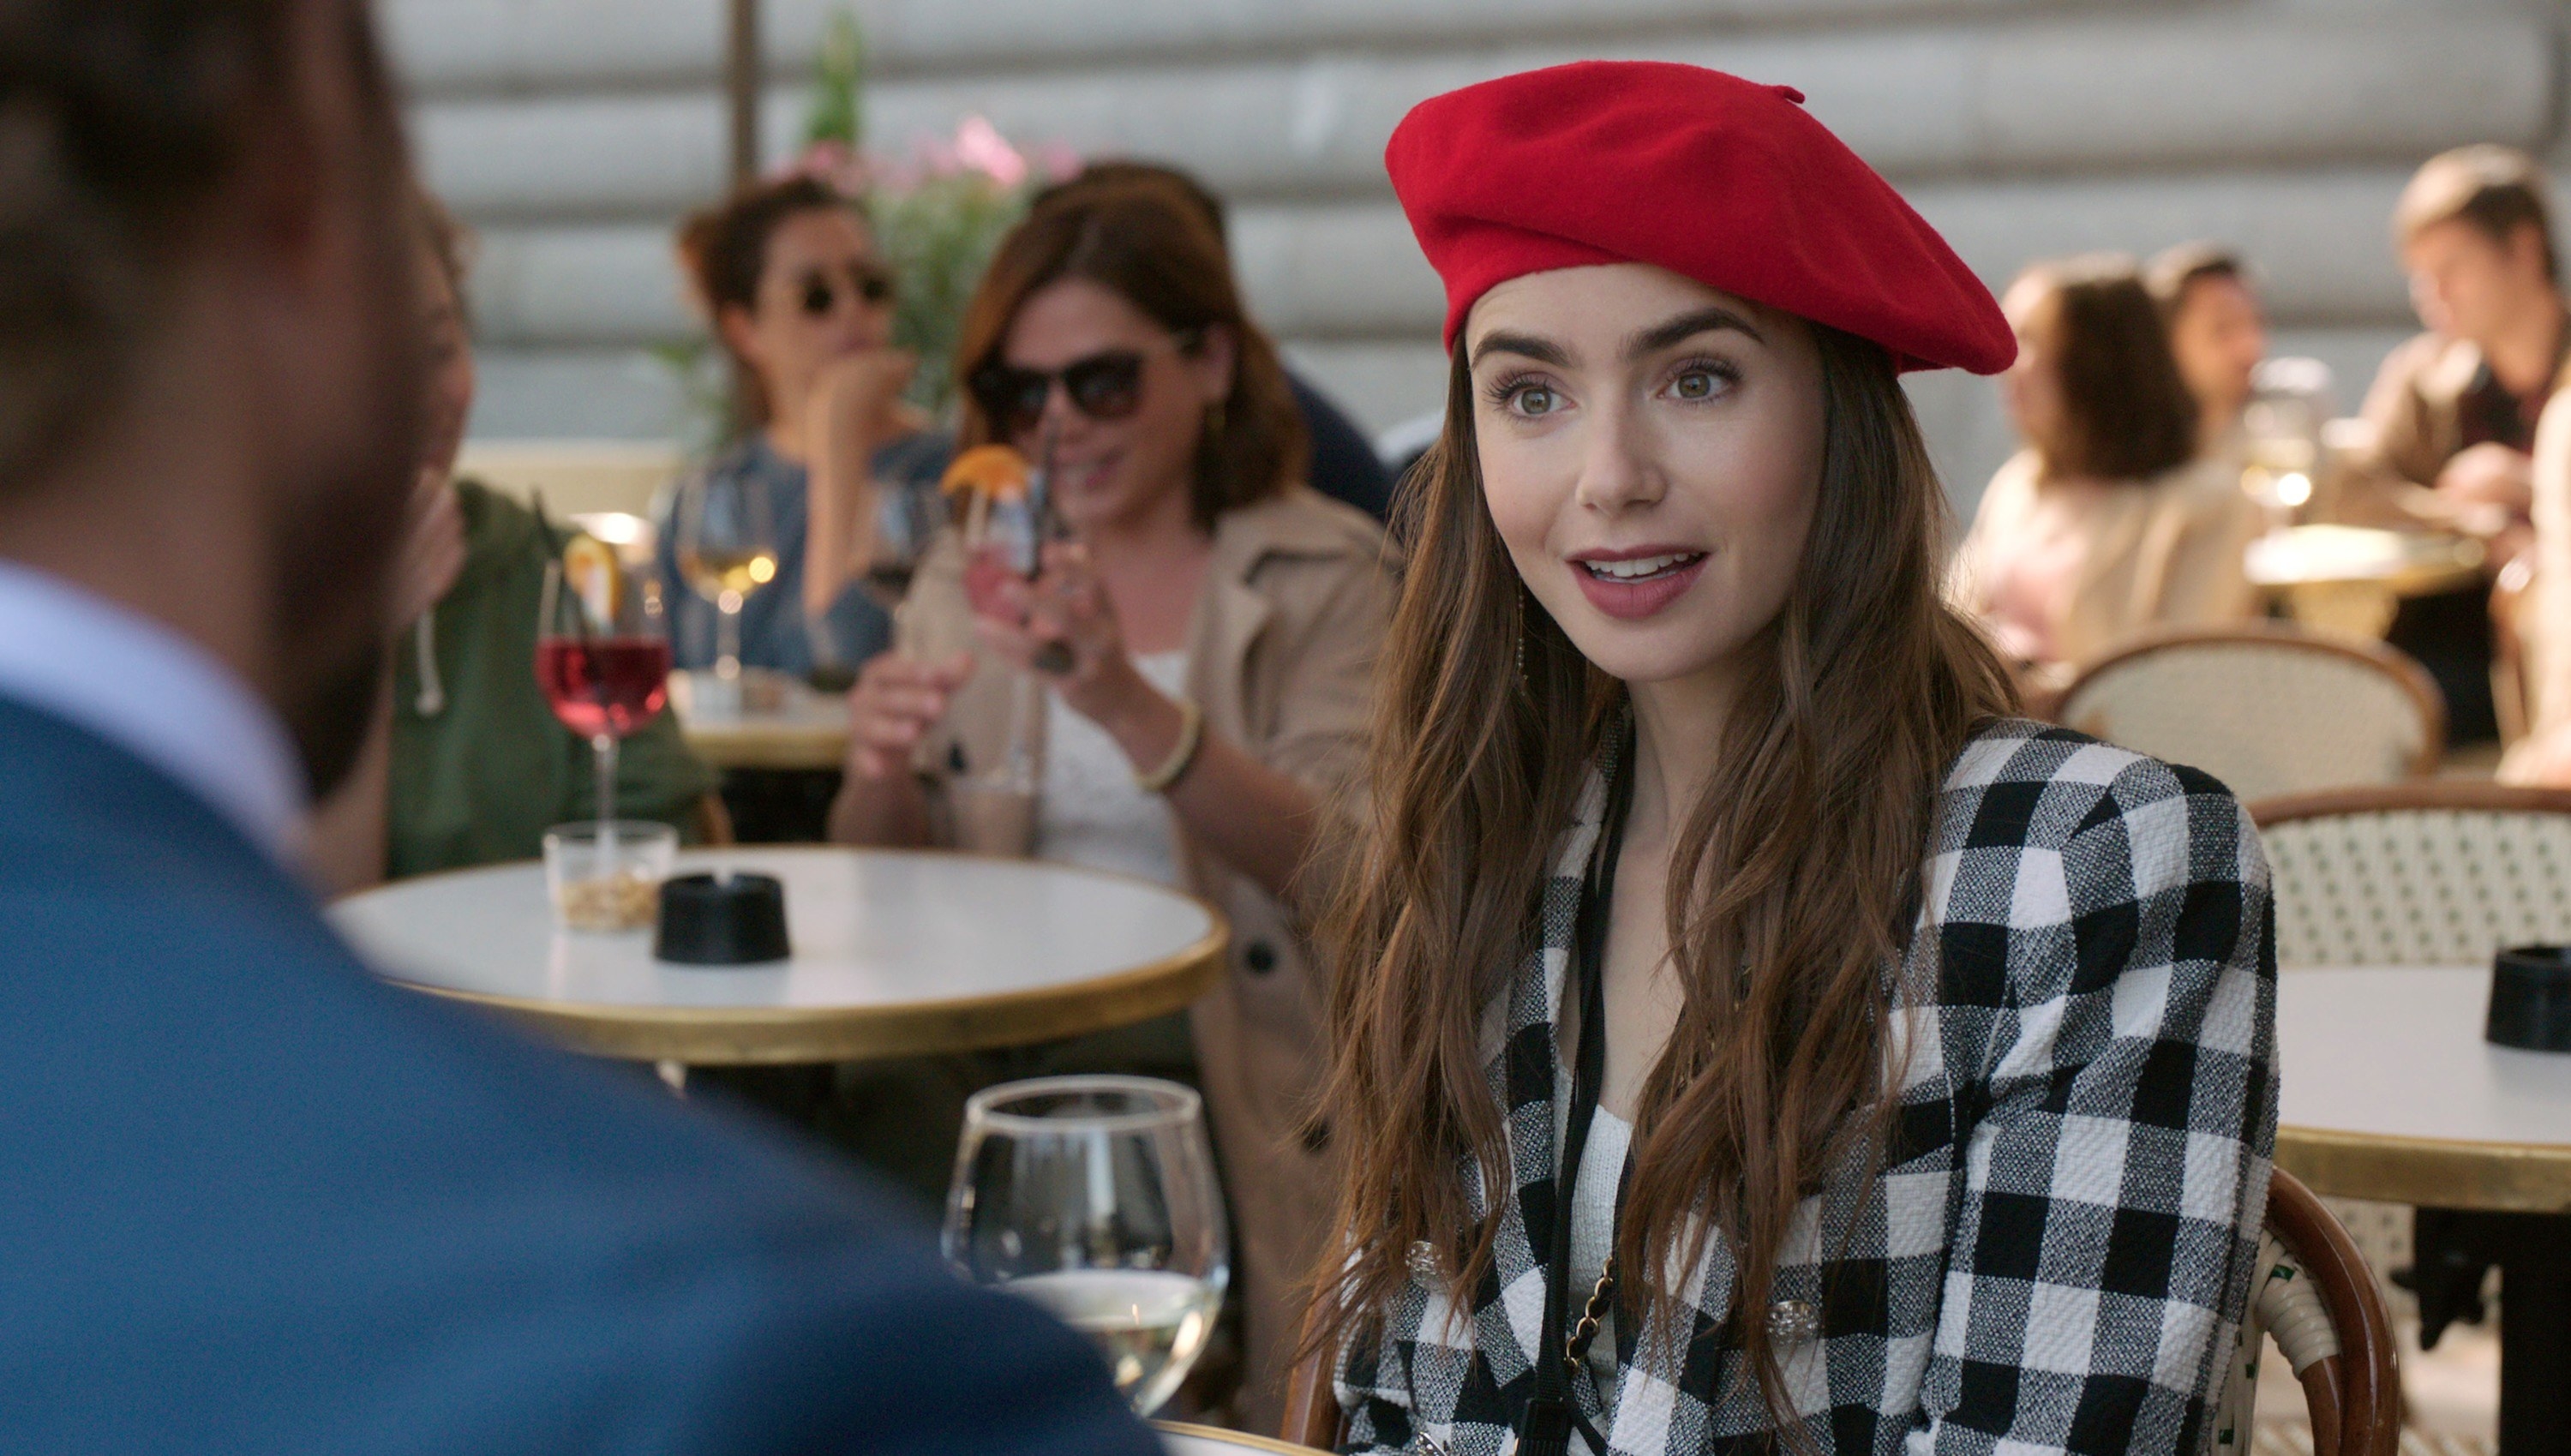 Emily in a beret and a checkered top